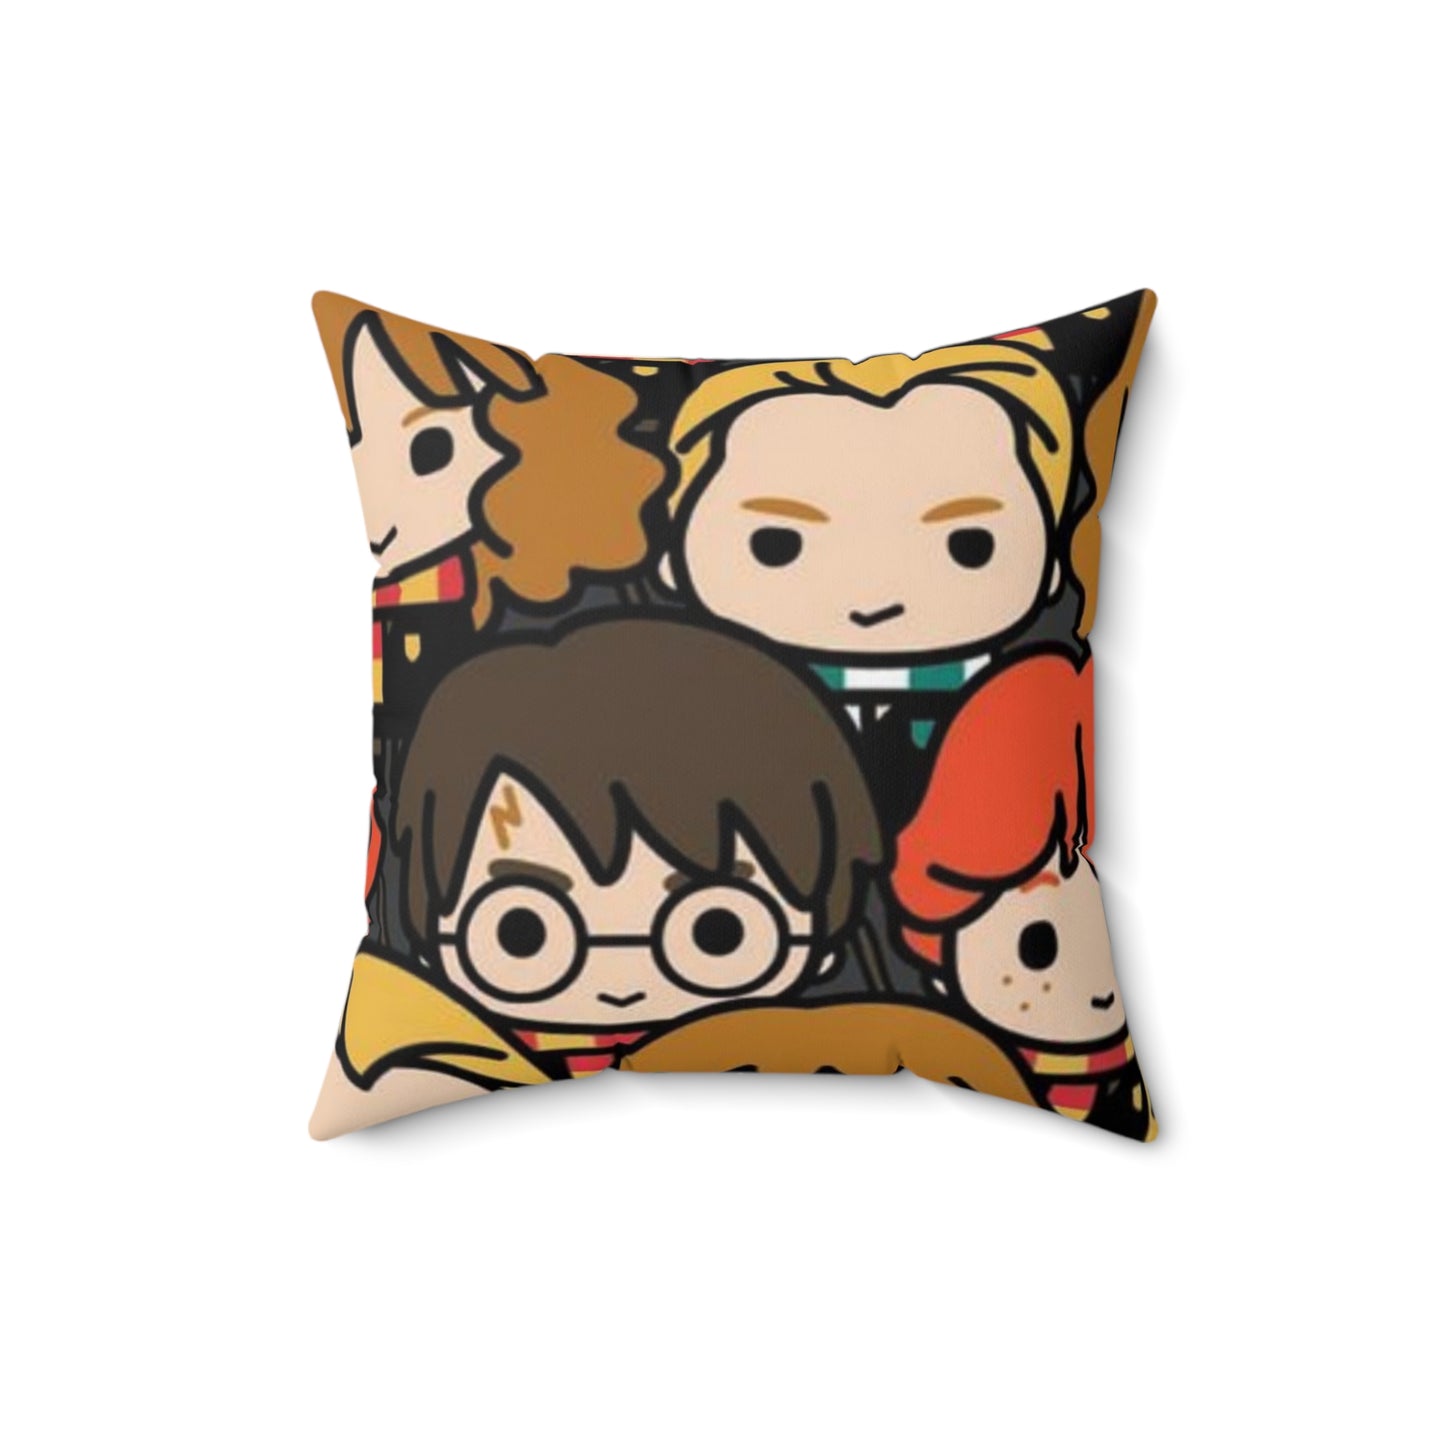 Modern and personalized cushion to decorate any space (Harry Potter)